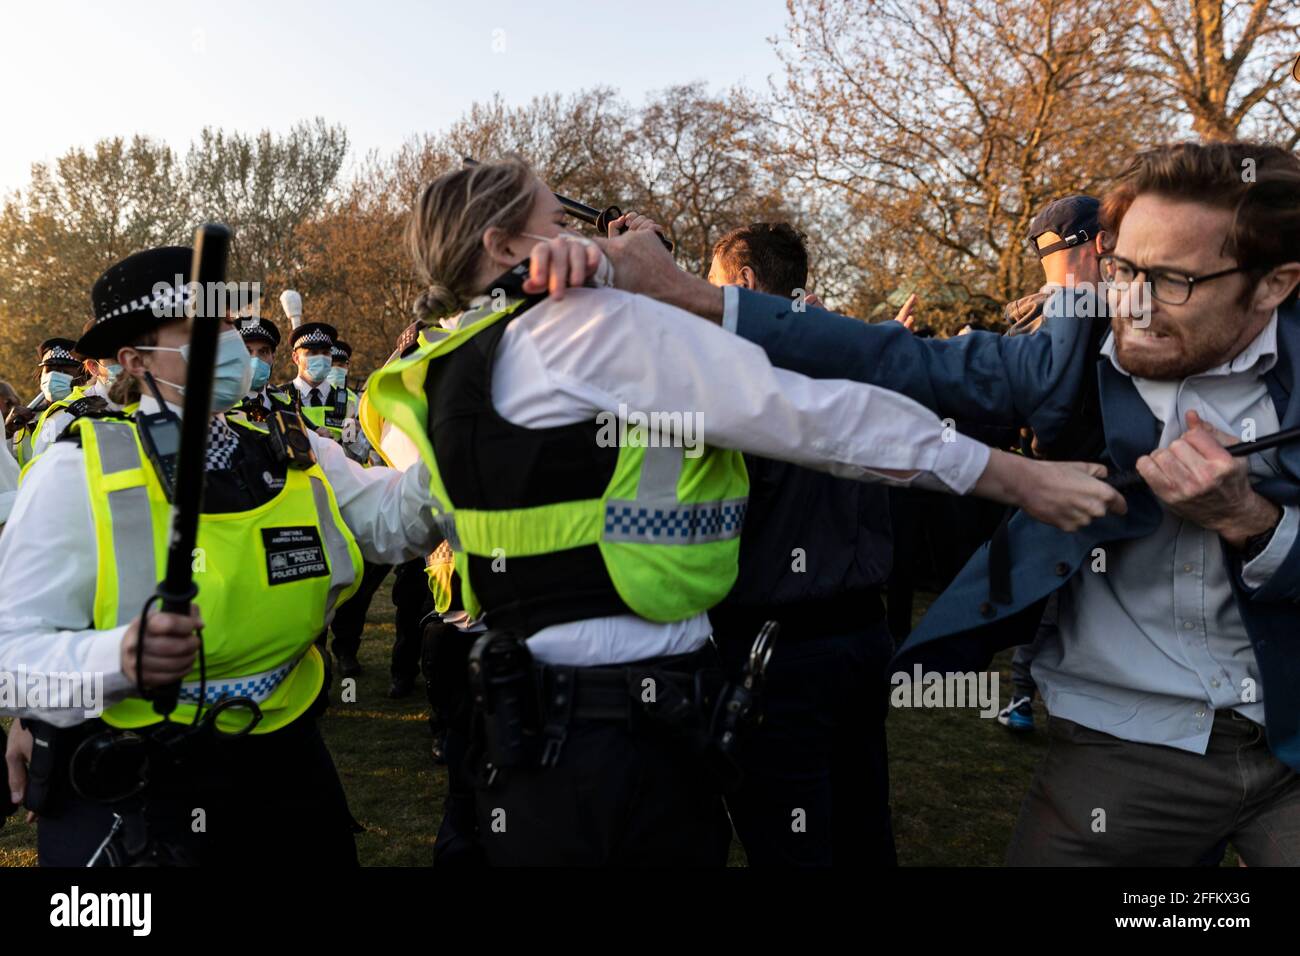 London, UK. 24th Apr, 2021. Police and protesters clash after the protest at Hyde Park. People called online to a flash mob-style mass gathering against vaccine passport, face masks and lockdown. The government aims to provide official proof of vaccination for millions of British holidaymakers this summer starting as early as May 17th. Credit: May James/ZUMA Wire/Alamy Live News Stock Photo